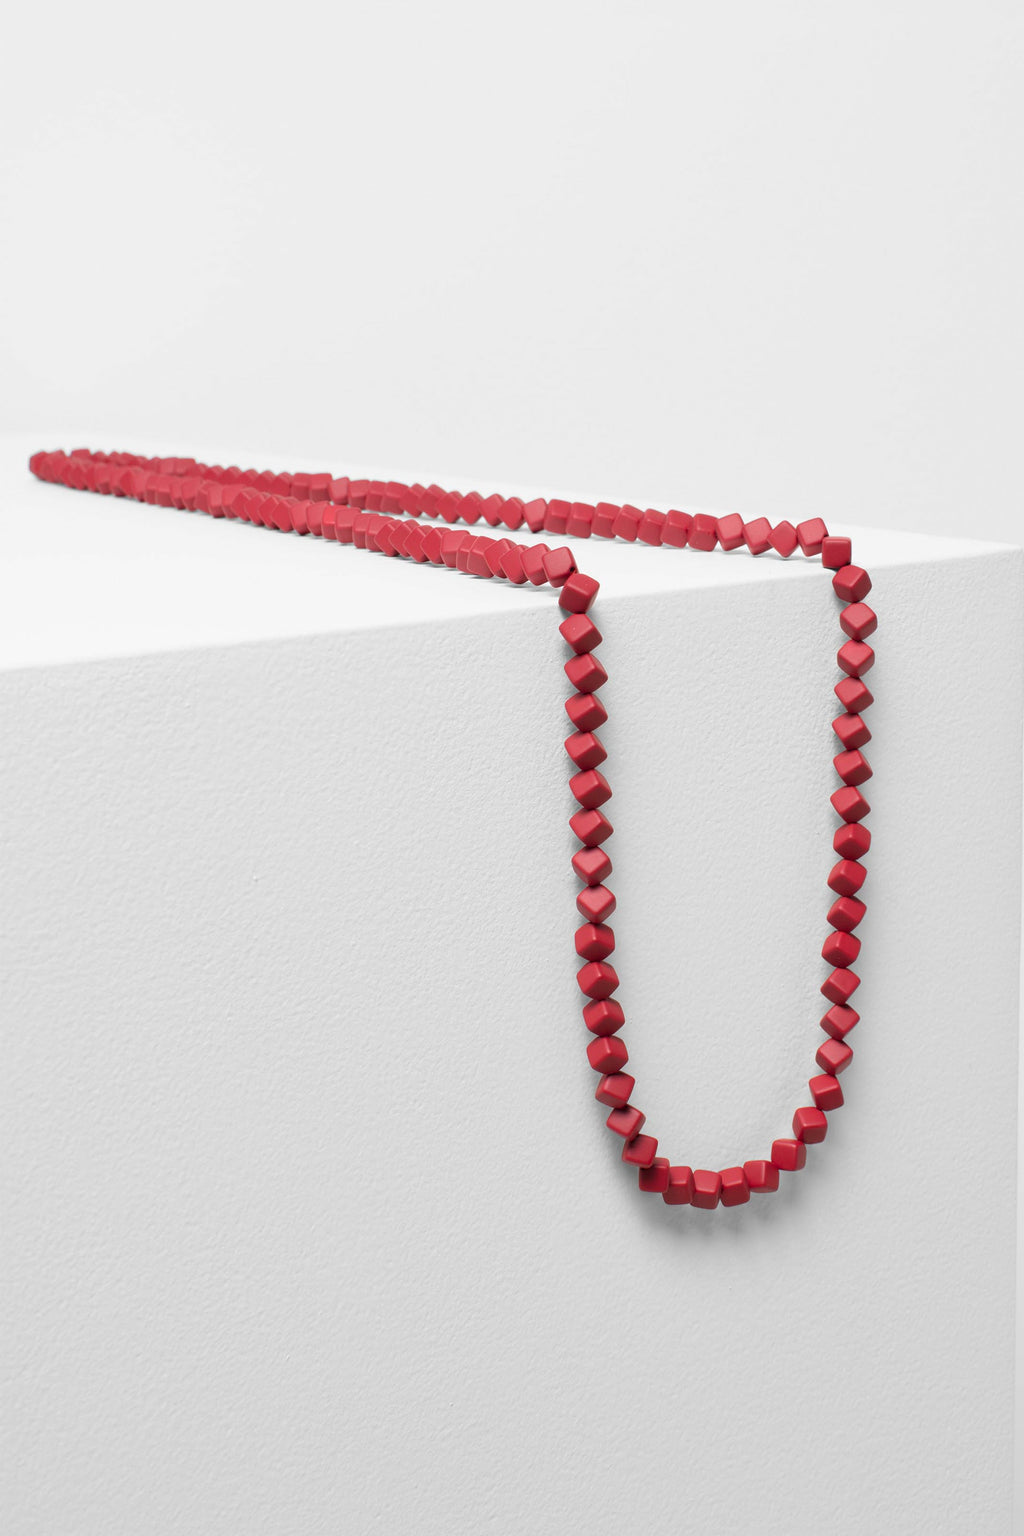 Solle Necklace in red by Elk the Label